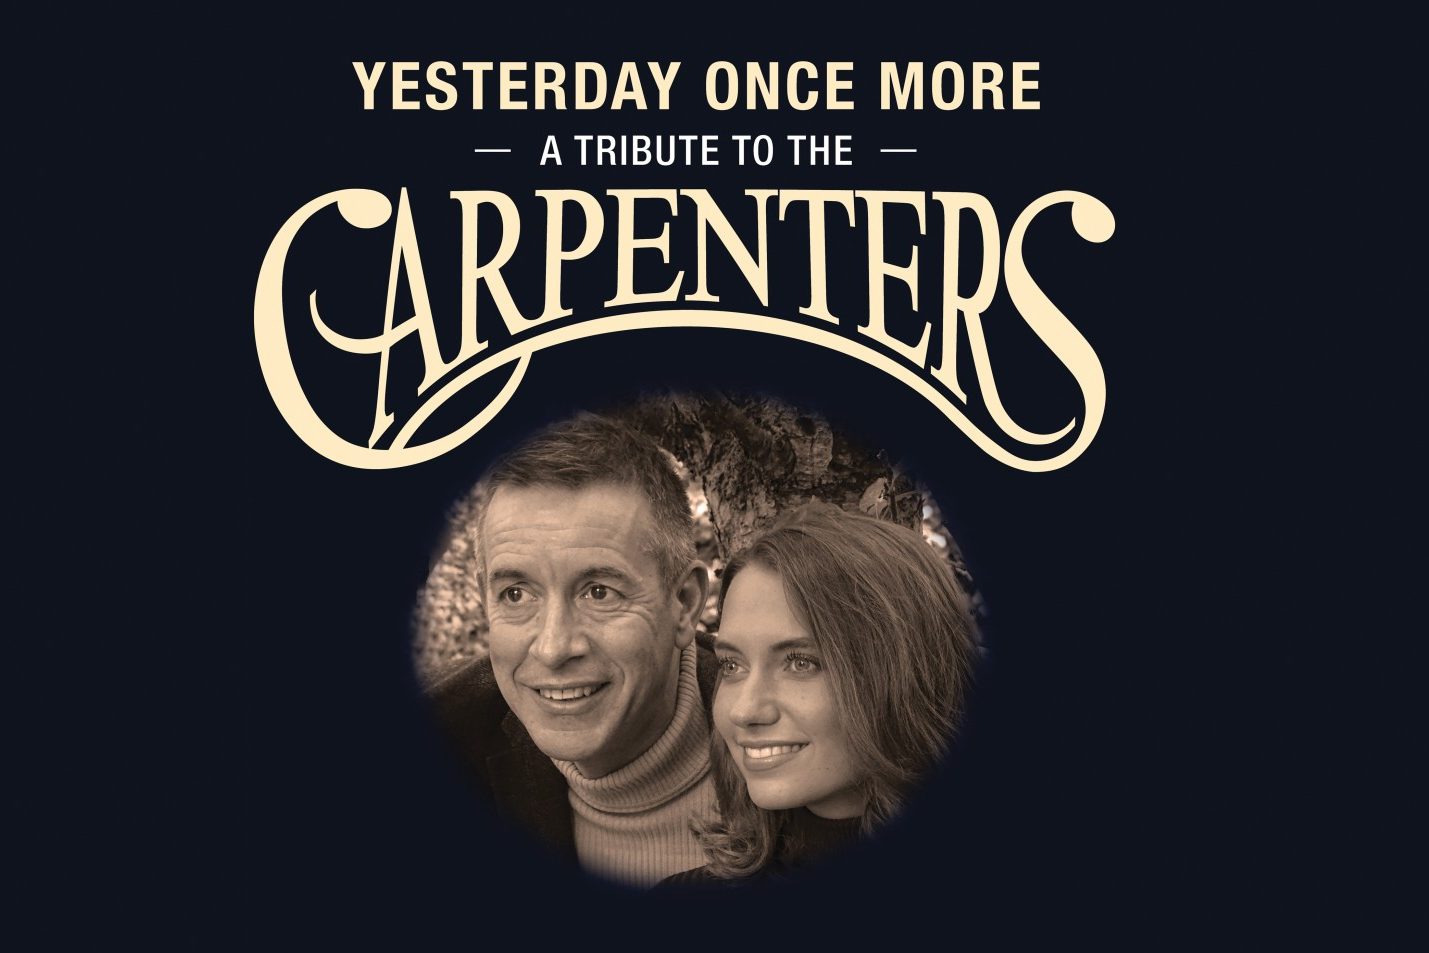 the carpenters yesterday once more